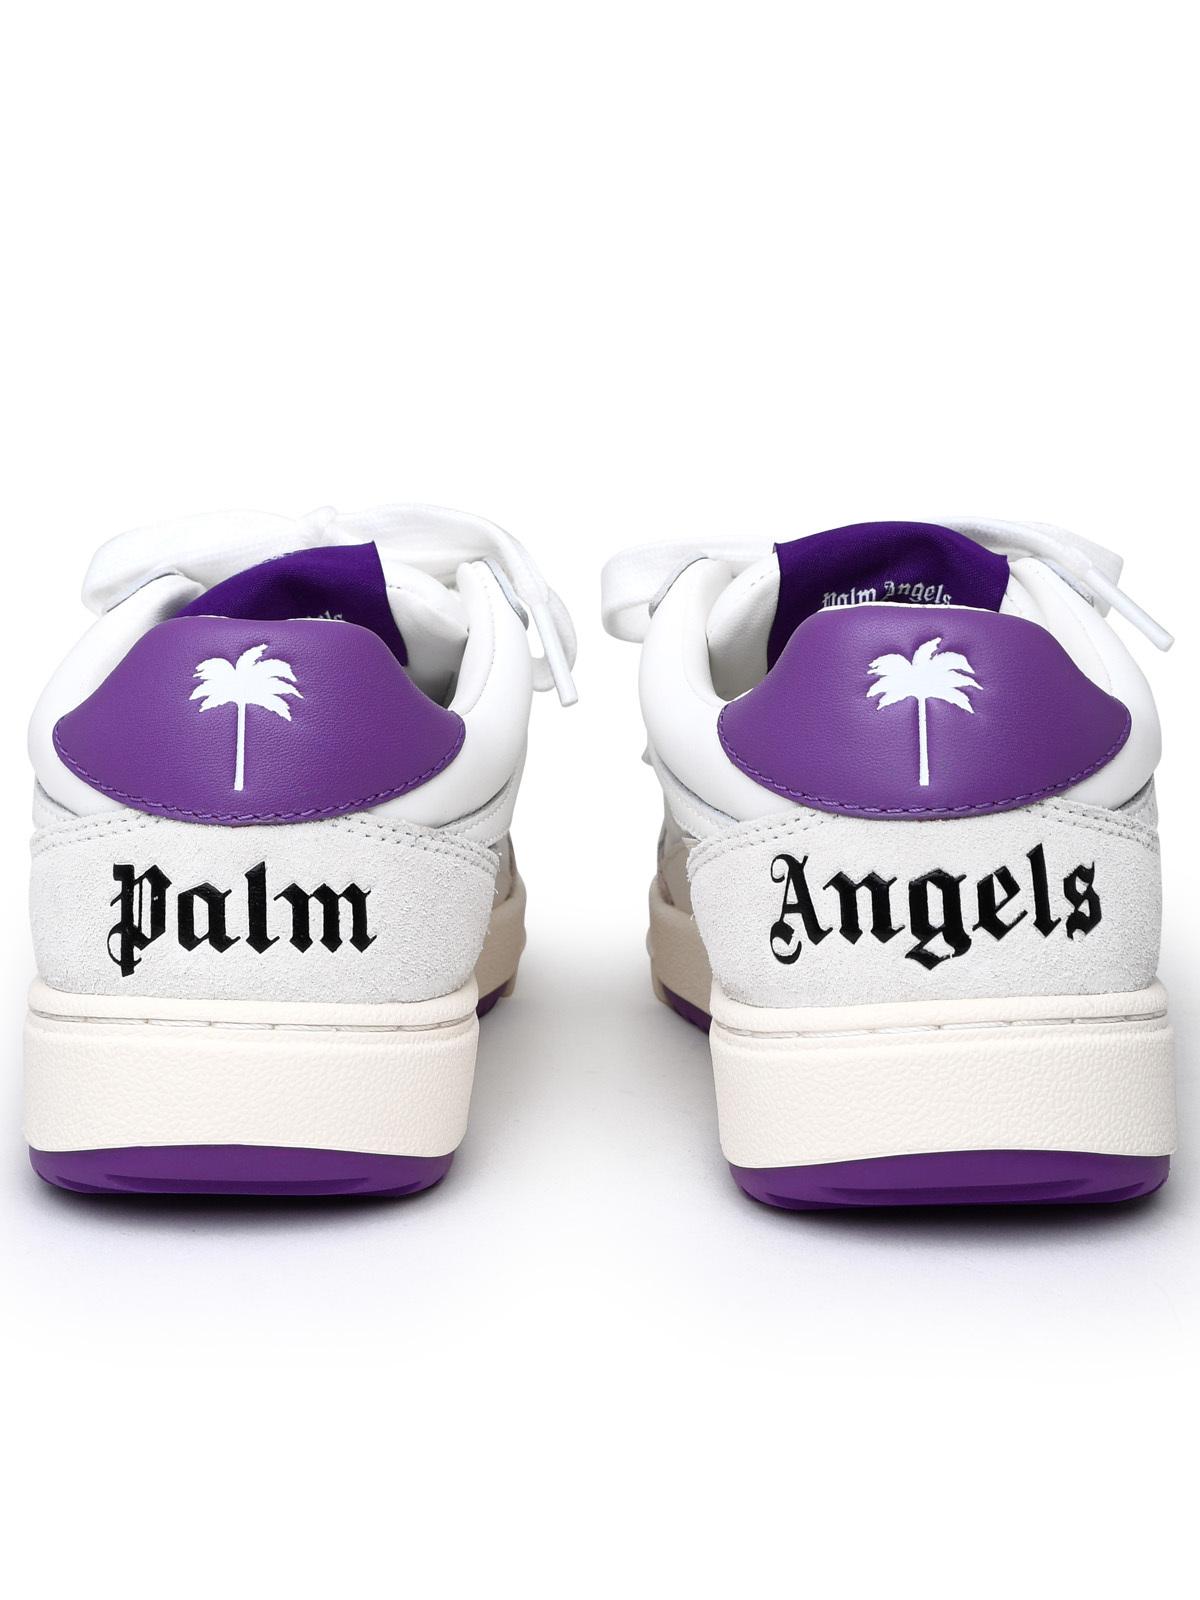 Palm Angels Palm University White Leather Sneakers Woman